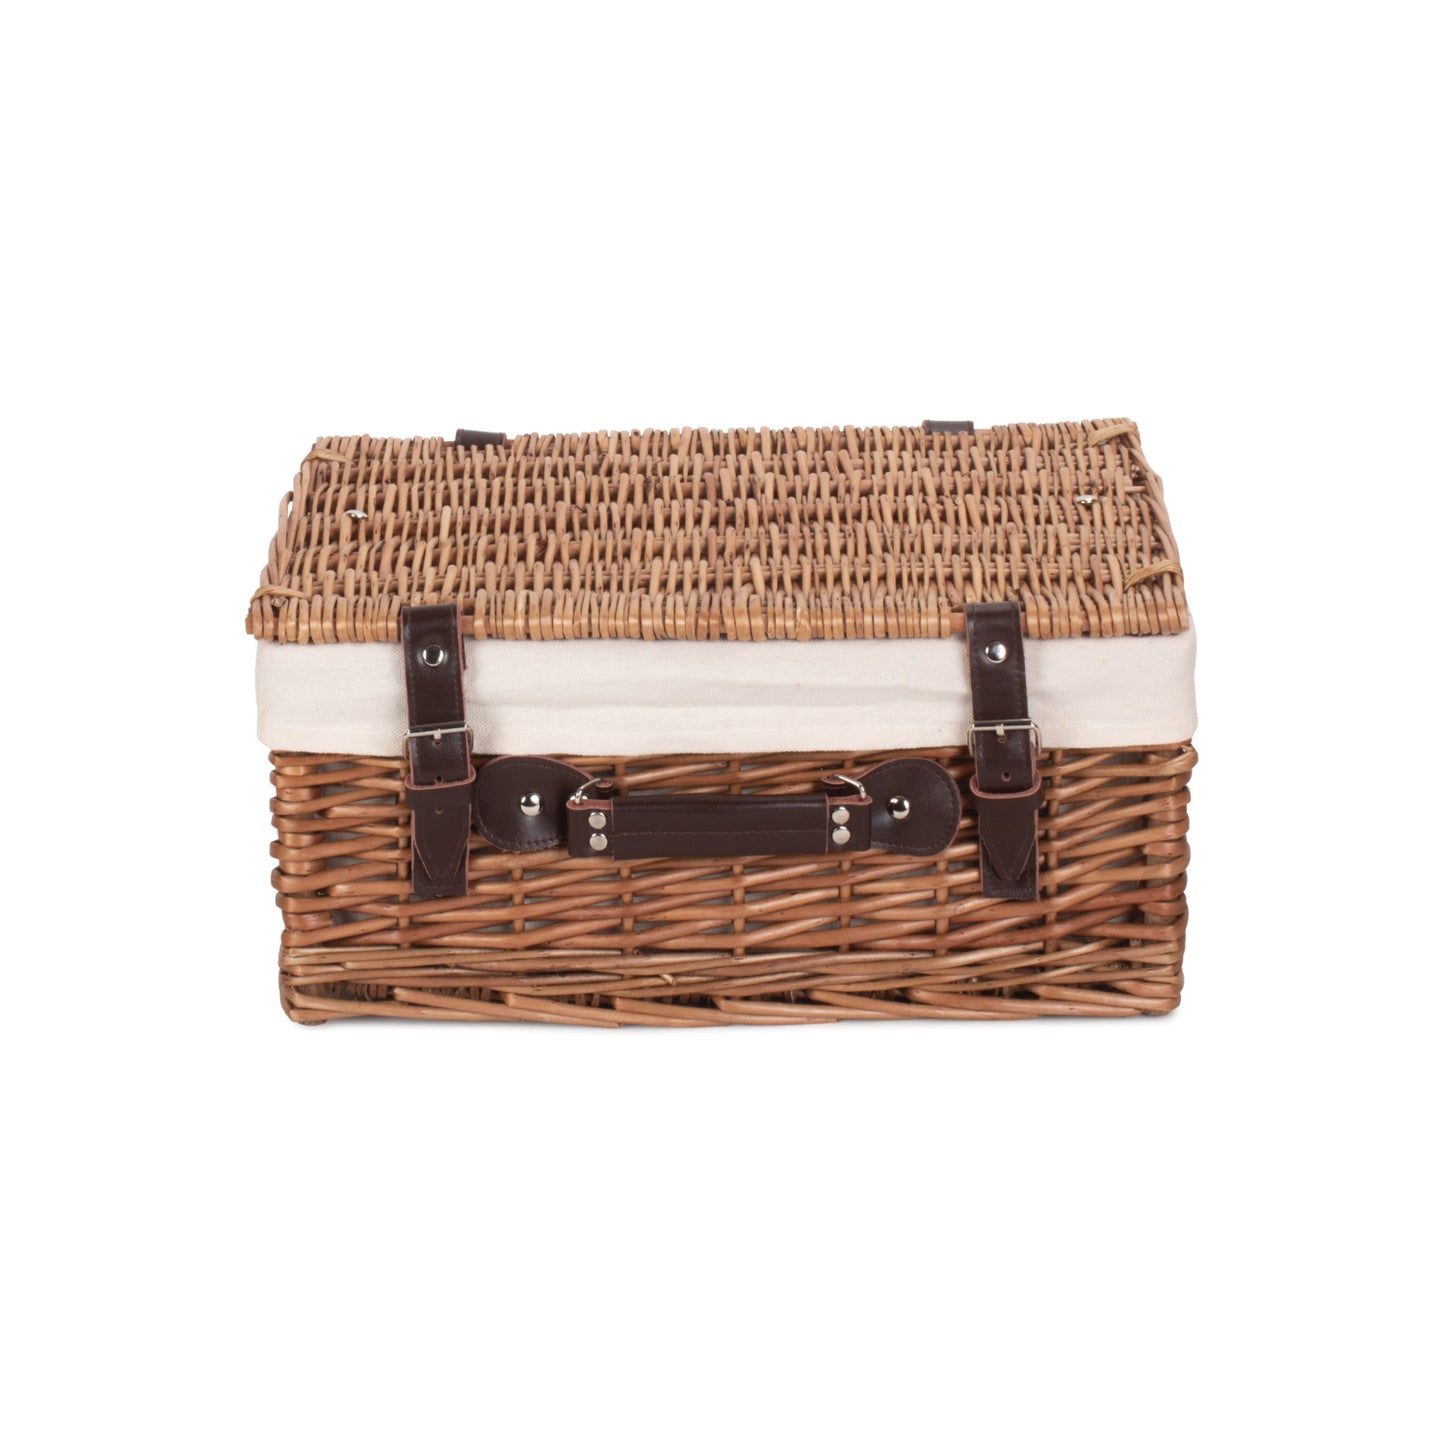 16 Inch Double Steamed Hamper With White Lining